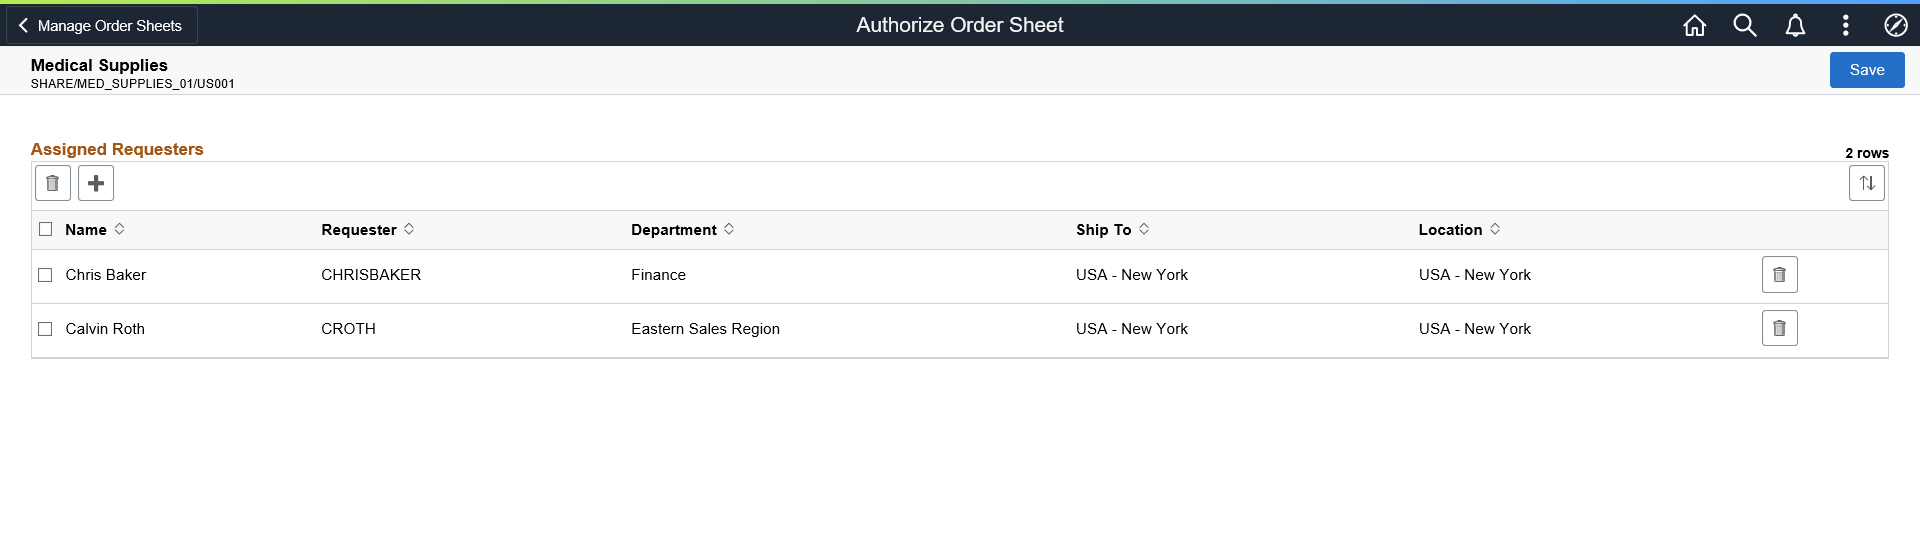 Authorize Order Sheet Page